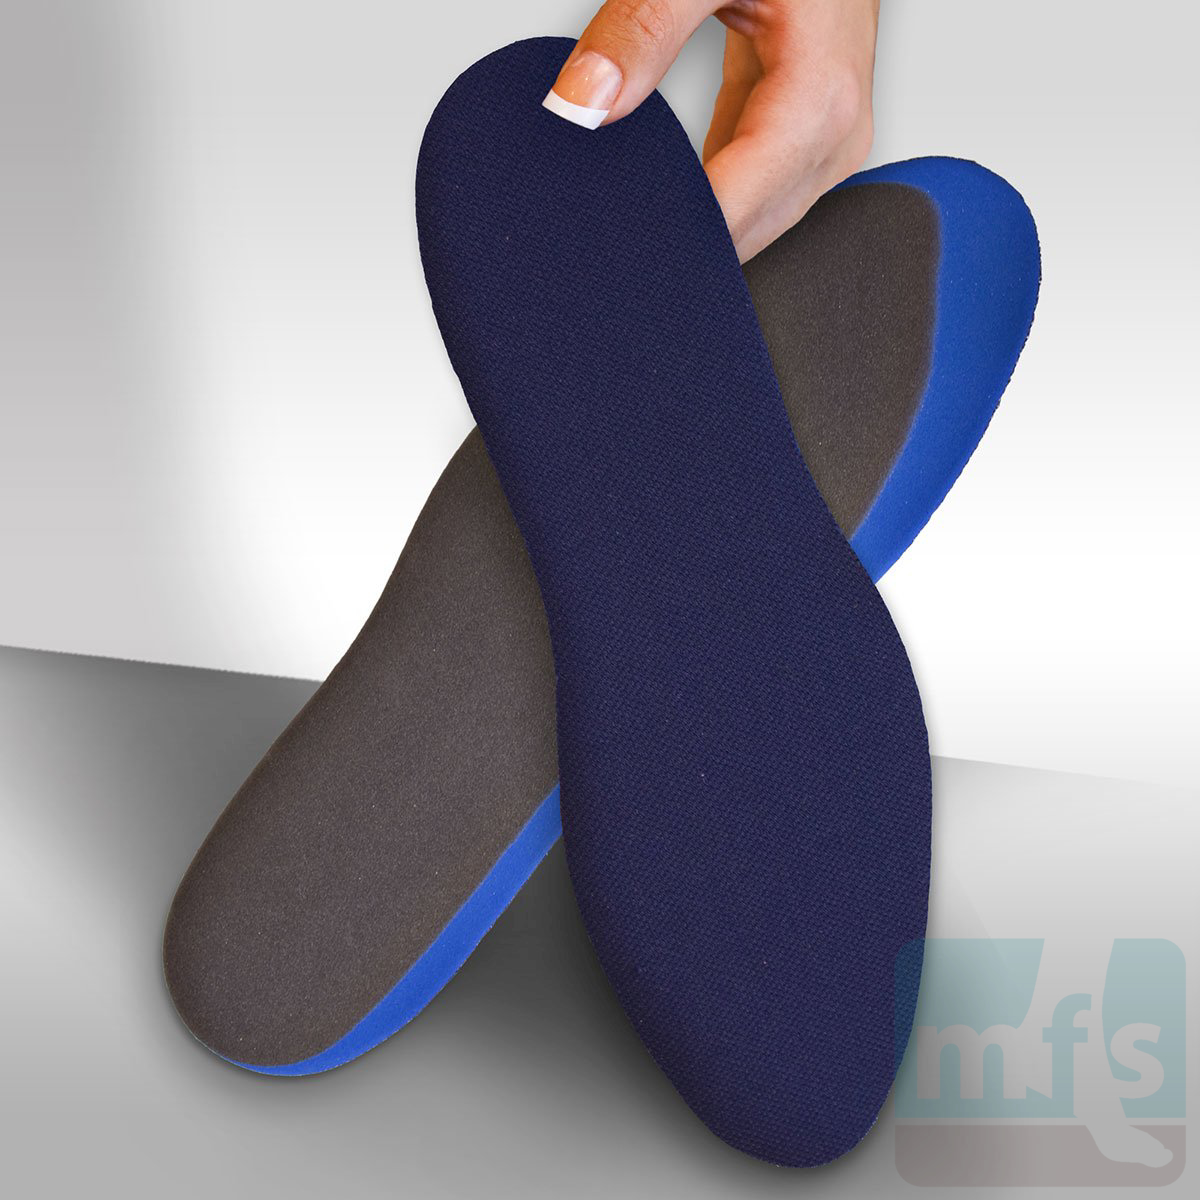 Heel Pain Treatment Instantly with Silicon Heel Pad - YouTube